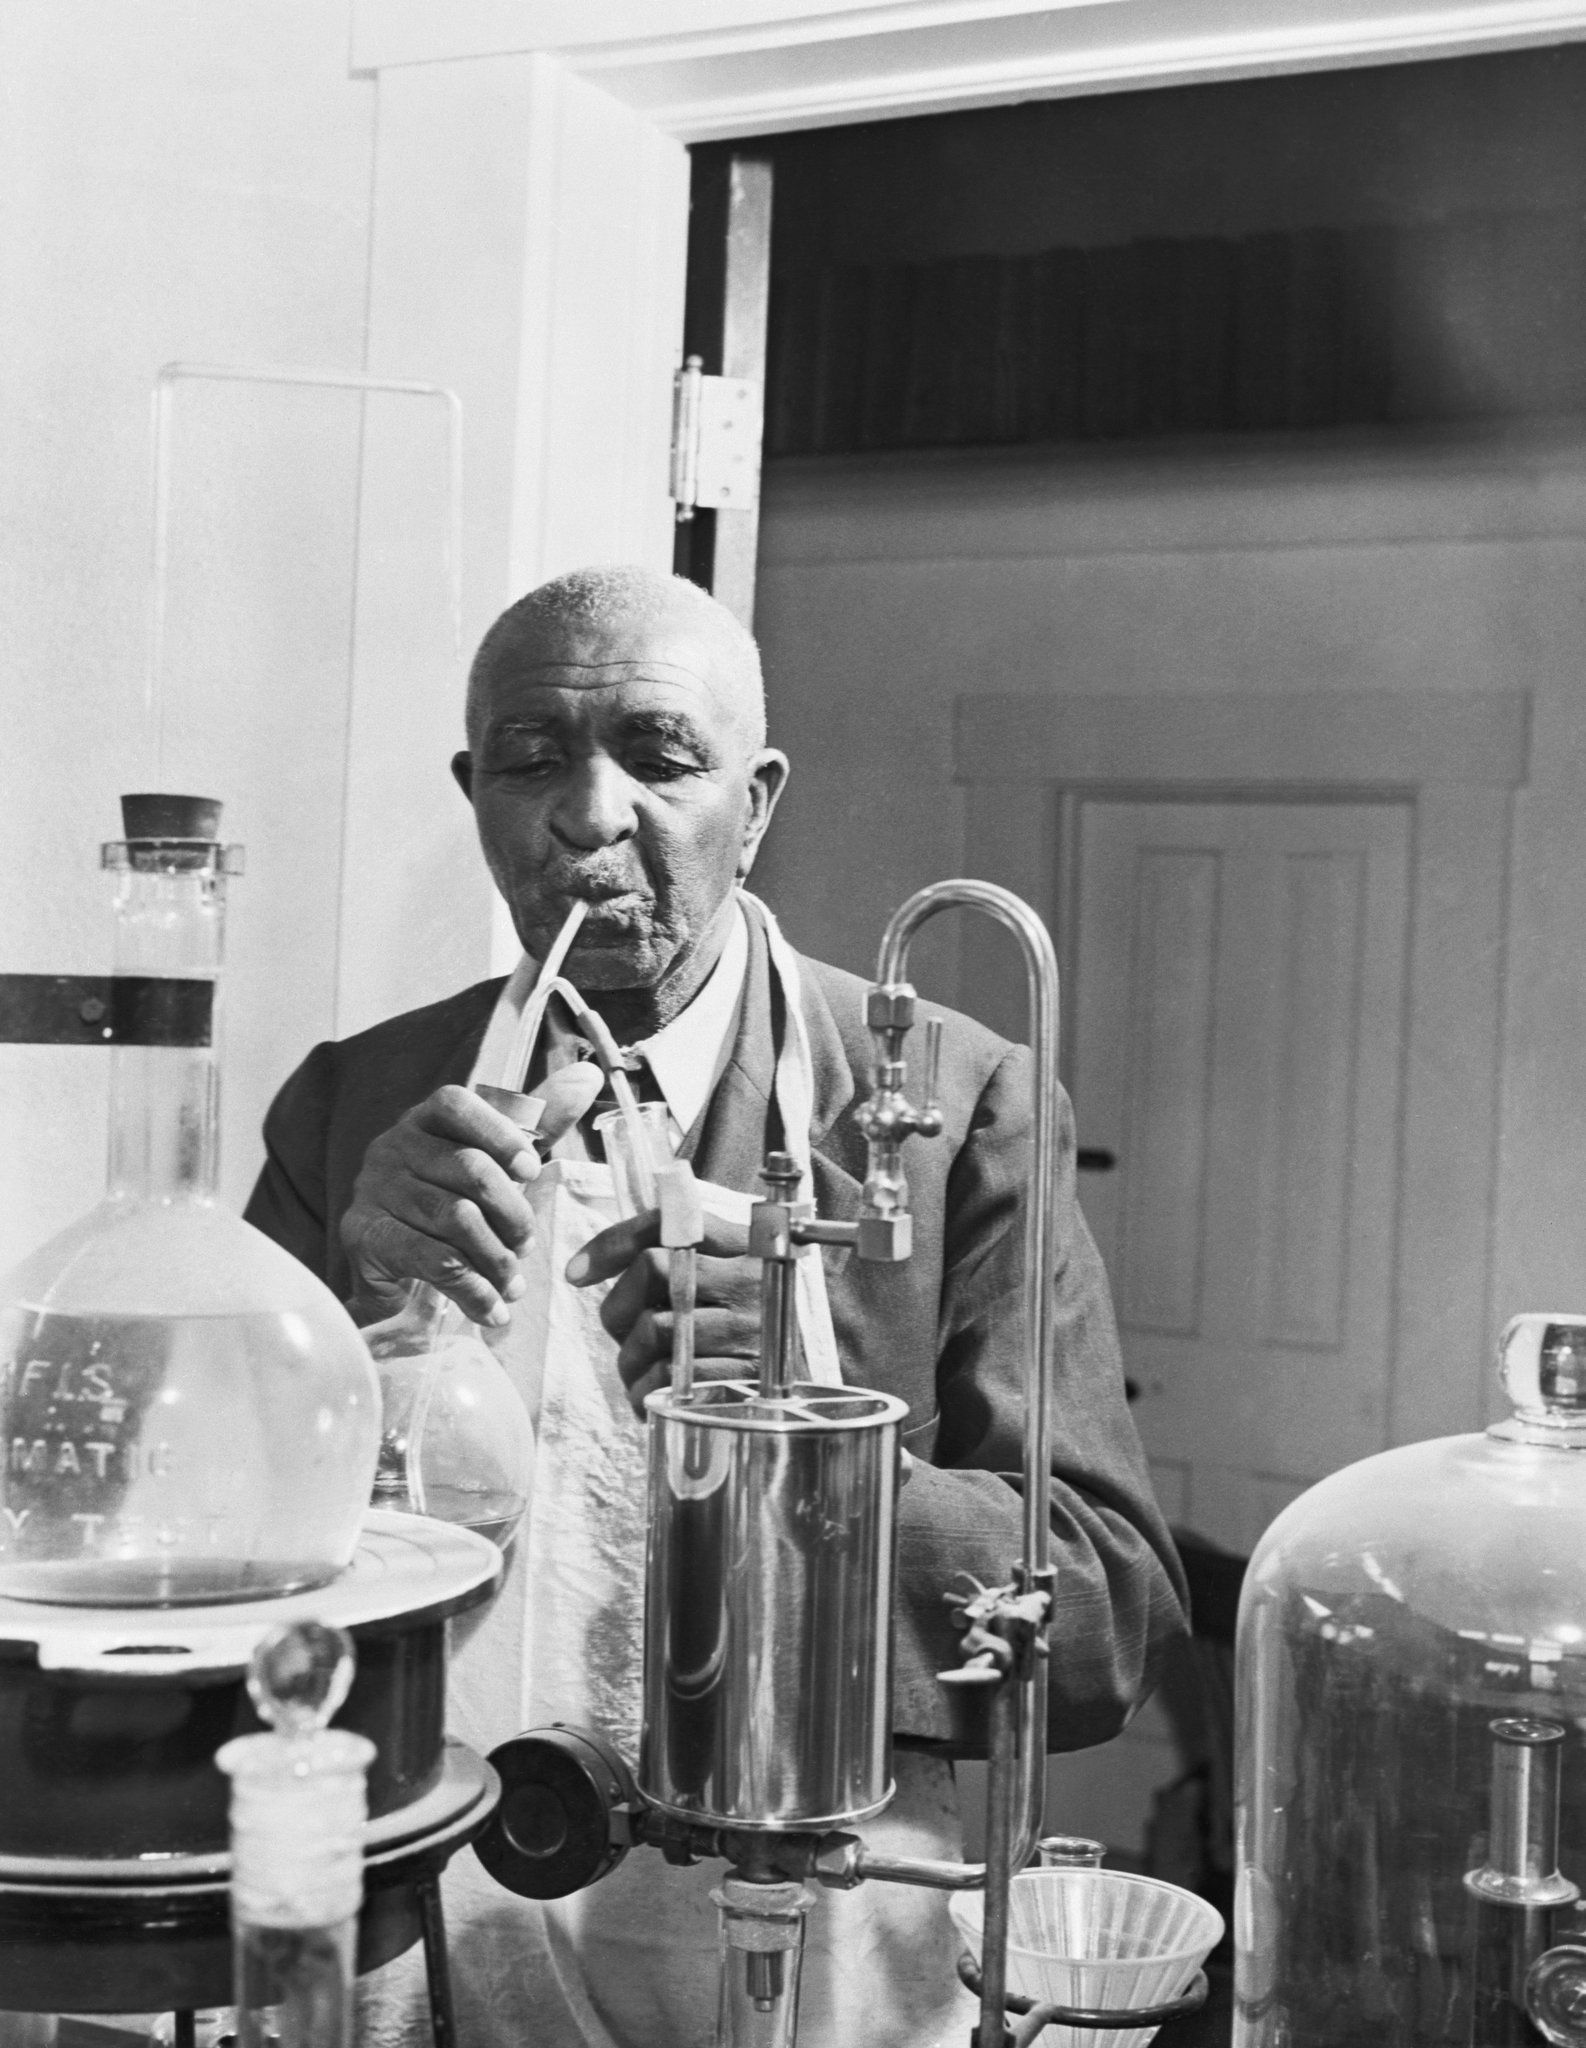 The American scientist and inventor George Washington Carver in his lab at Tuskegee Normal and Industrial Institute in 1925.